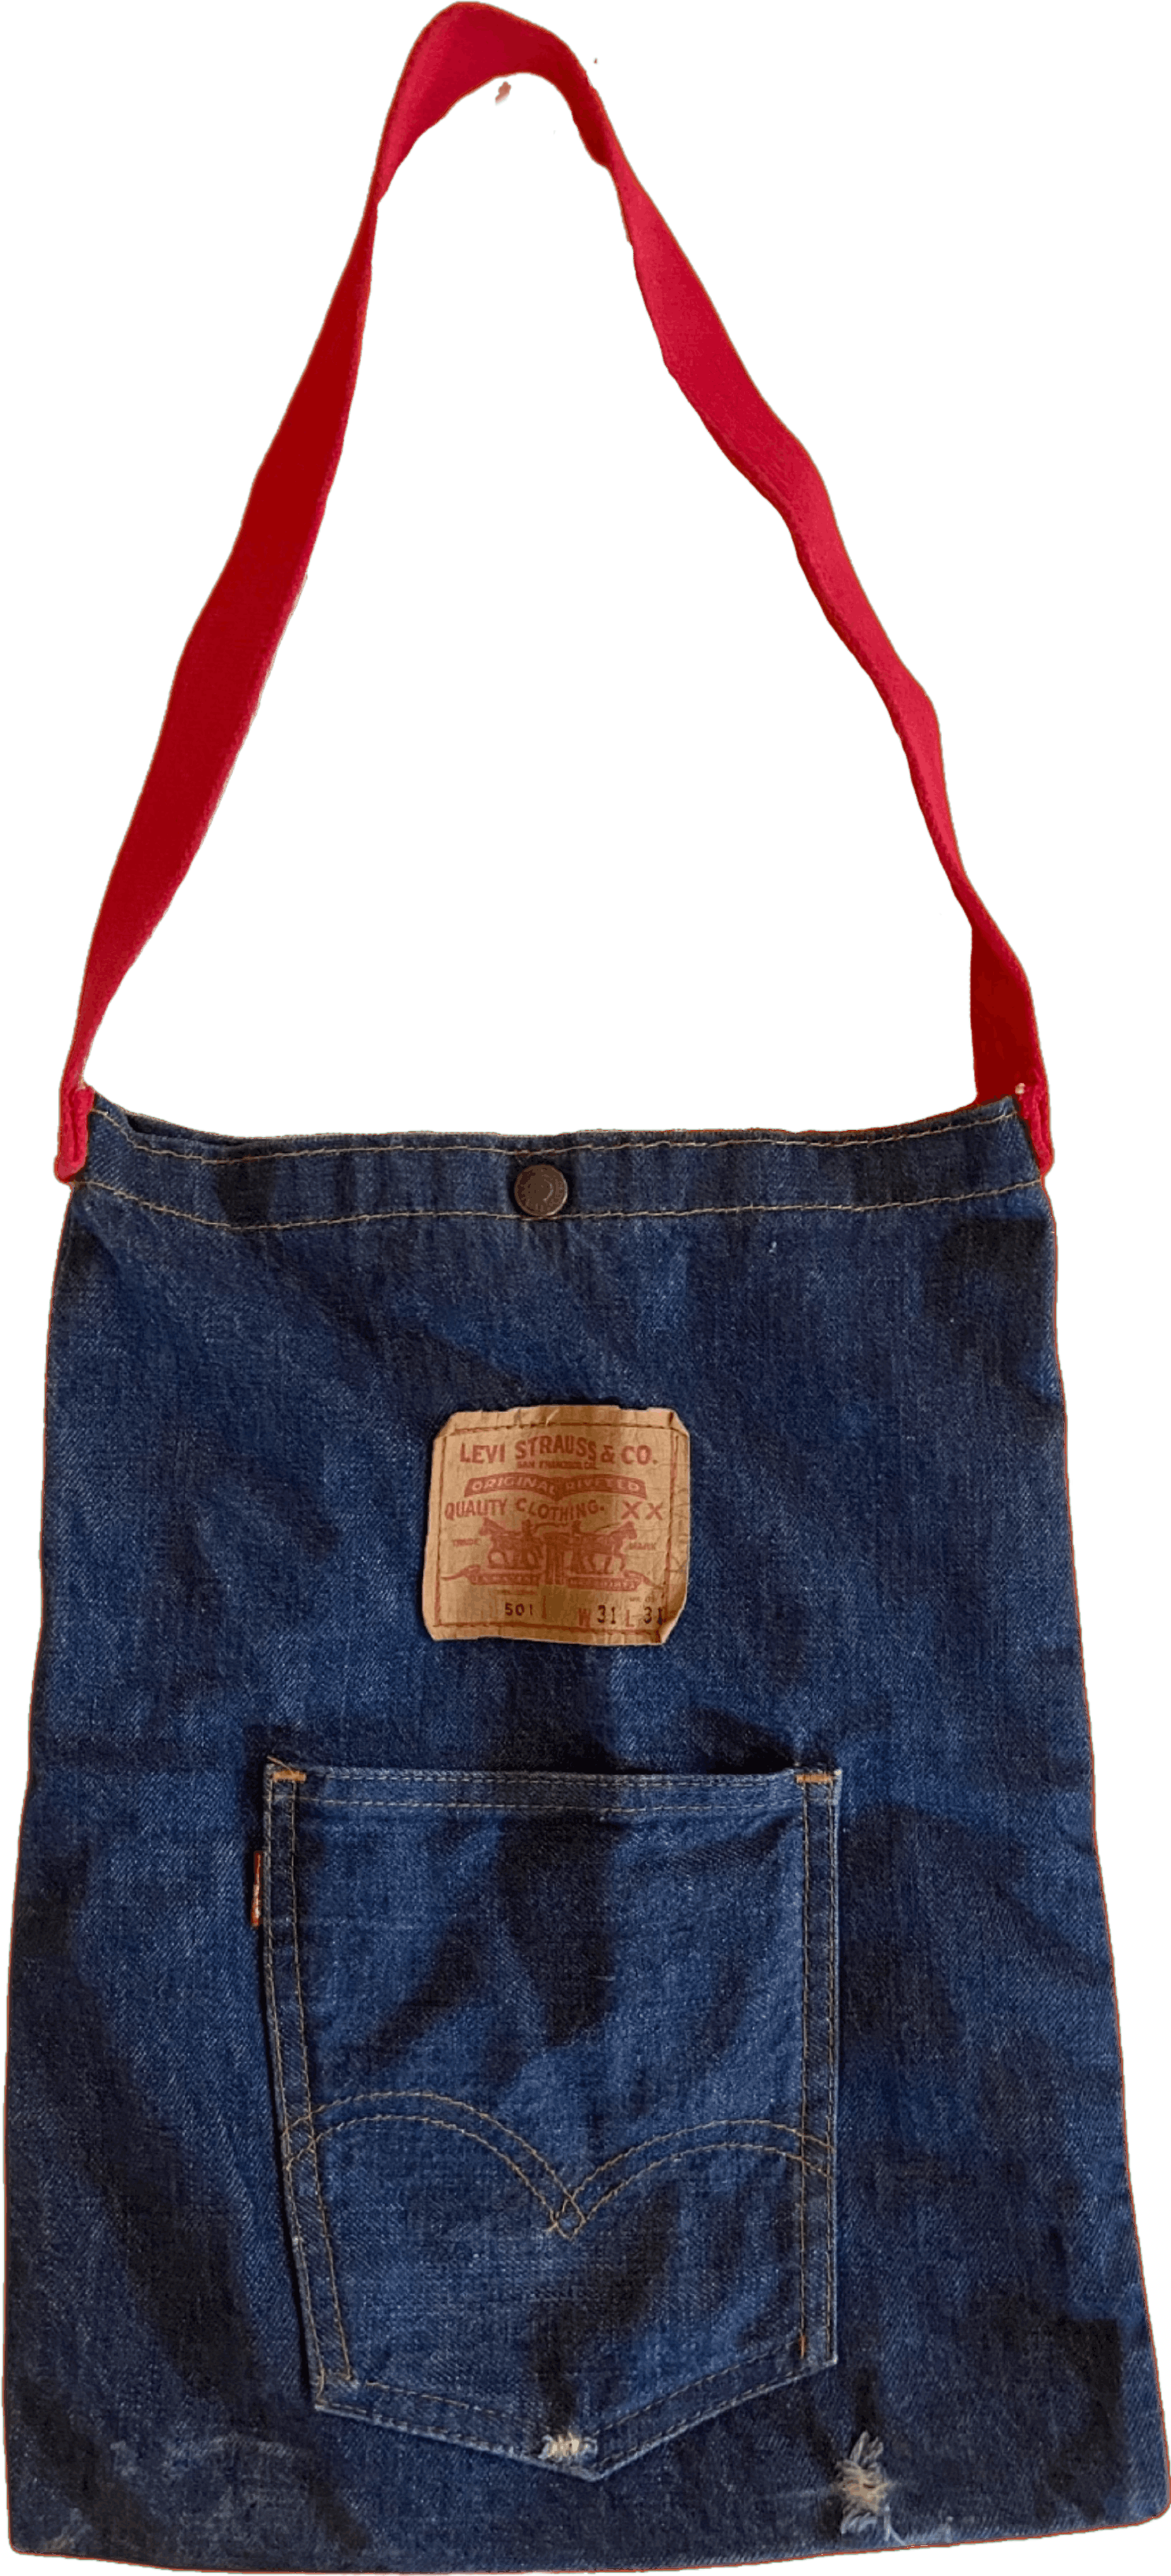 31 Bags with jean